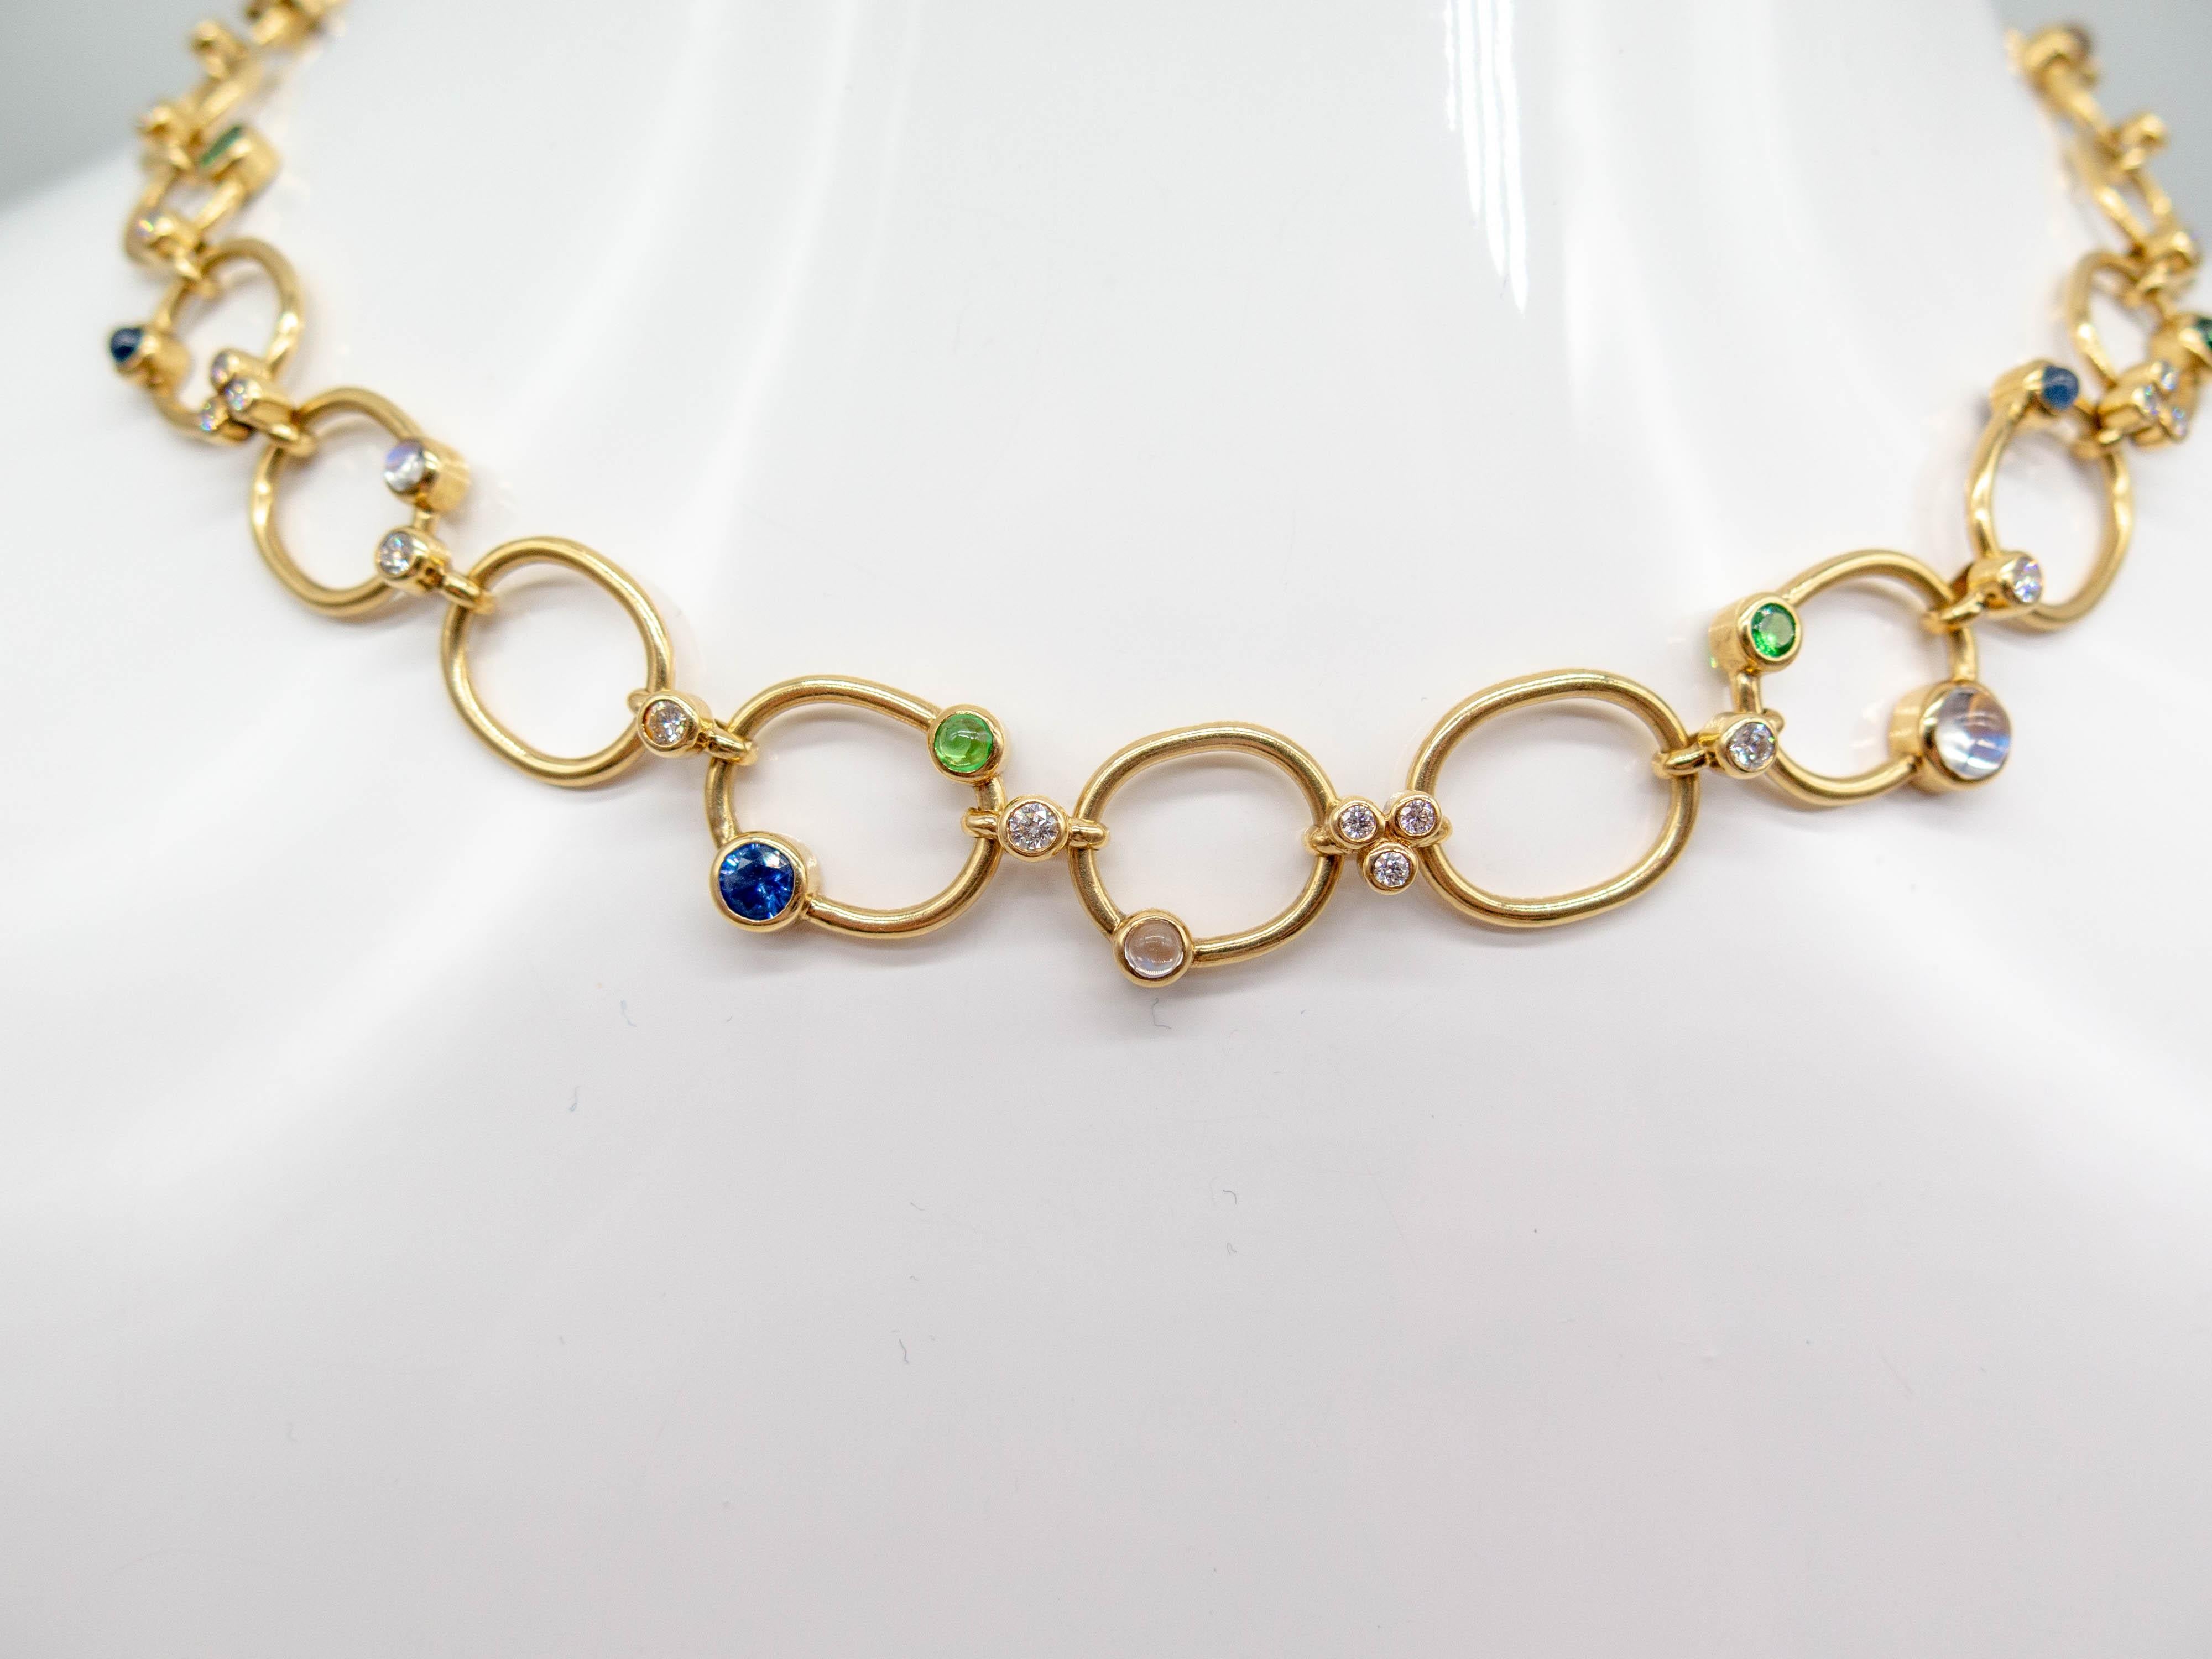 An elegant one of a kind necklace from Temple St Clair, part of the 